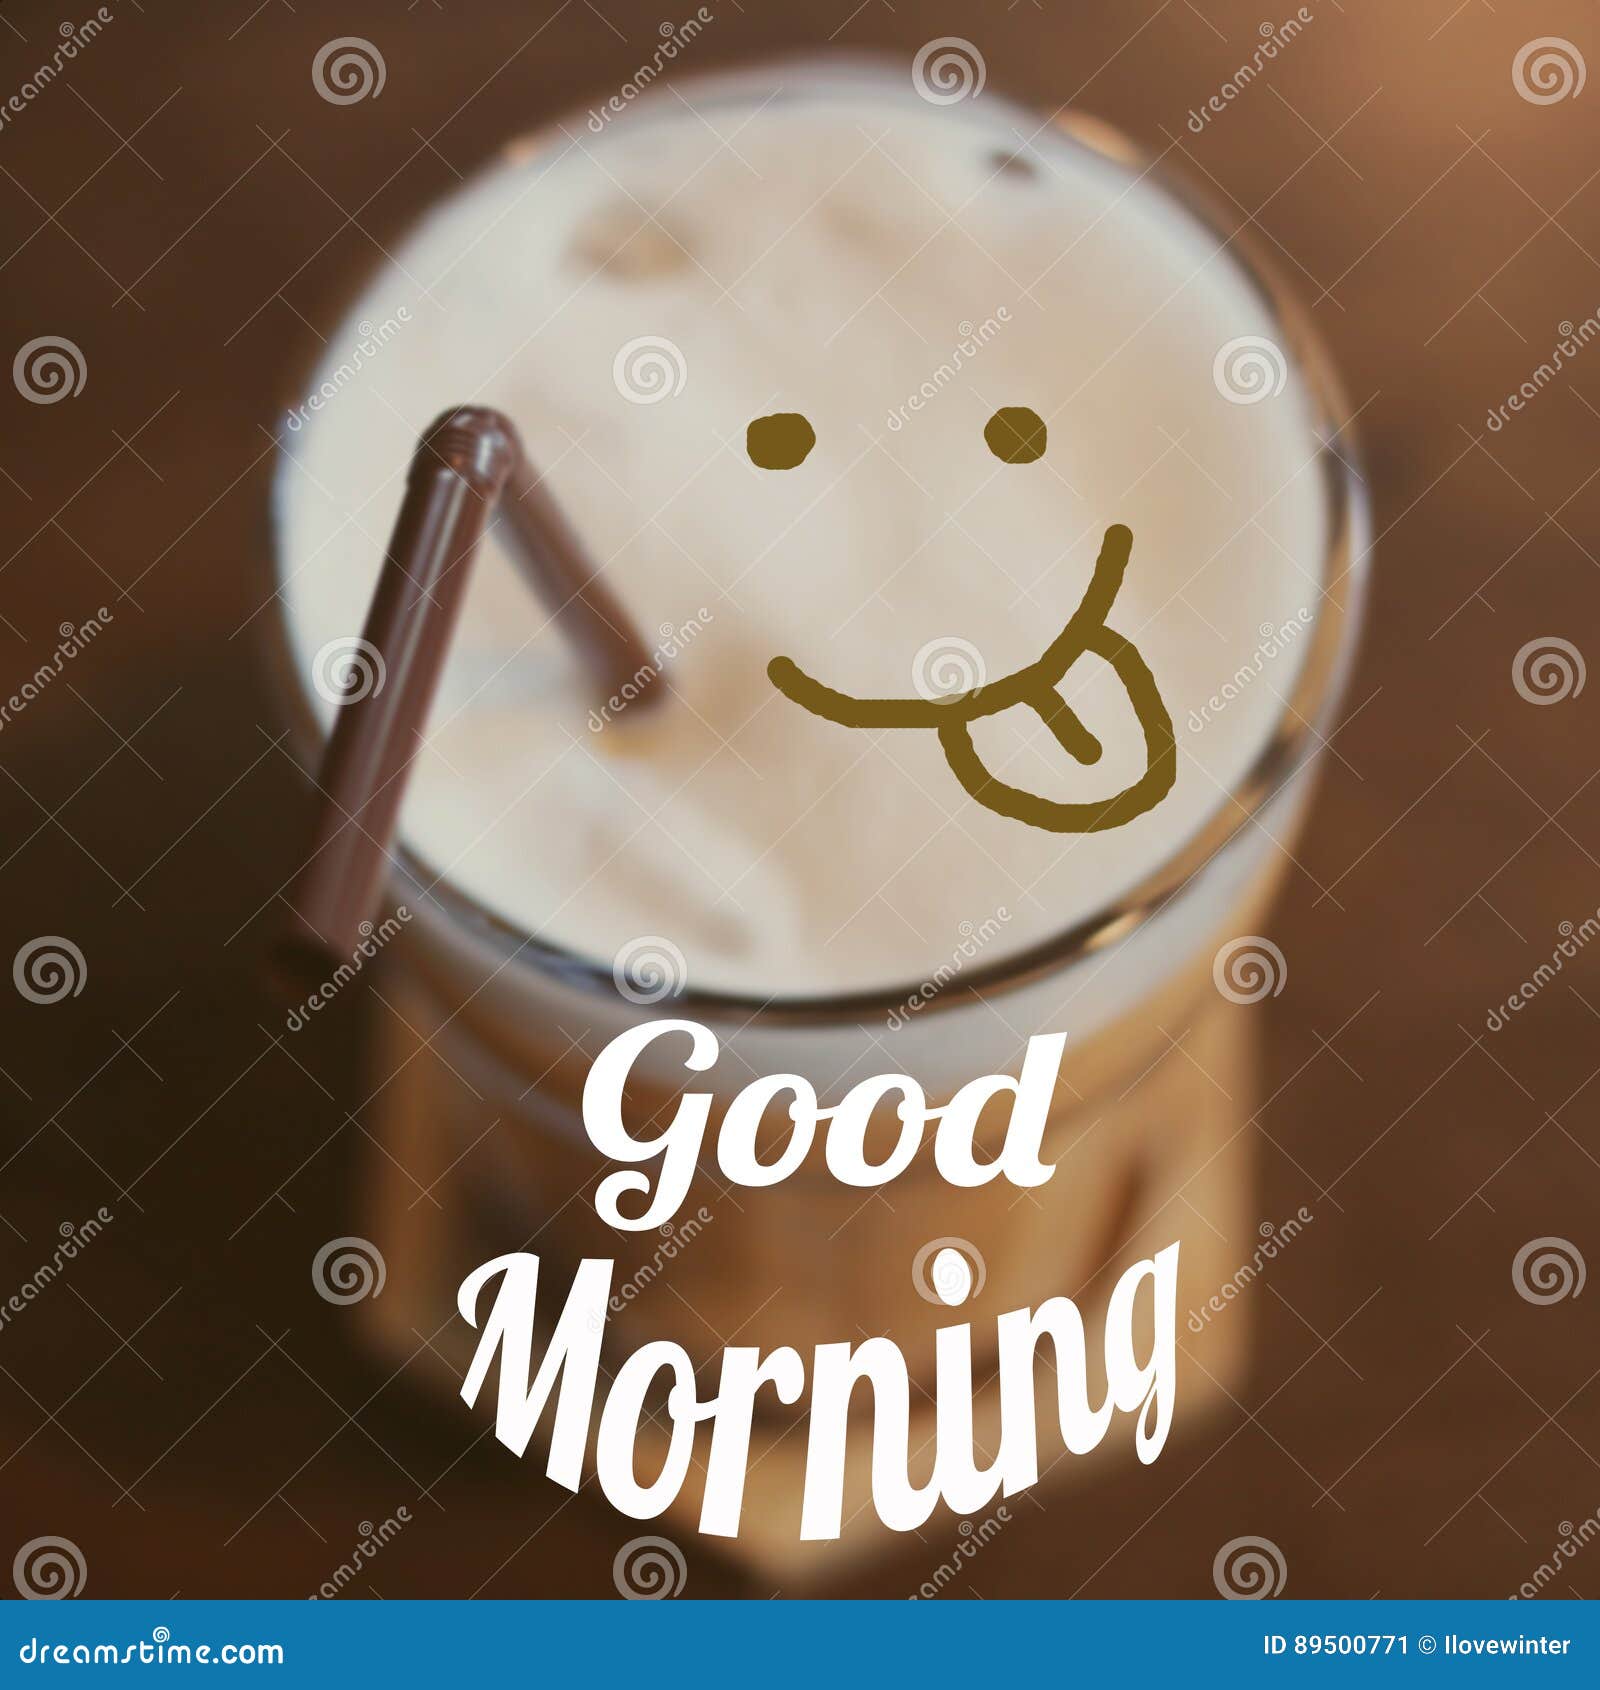 Good Morning With Ice Coffee And Smiling Face Stock Image - Image of wooden...